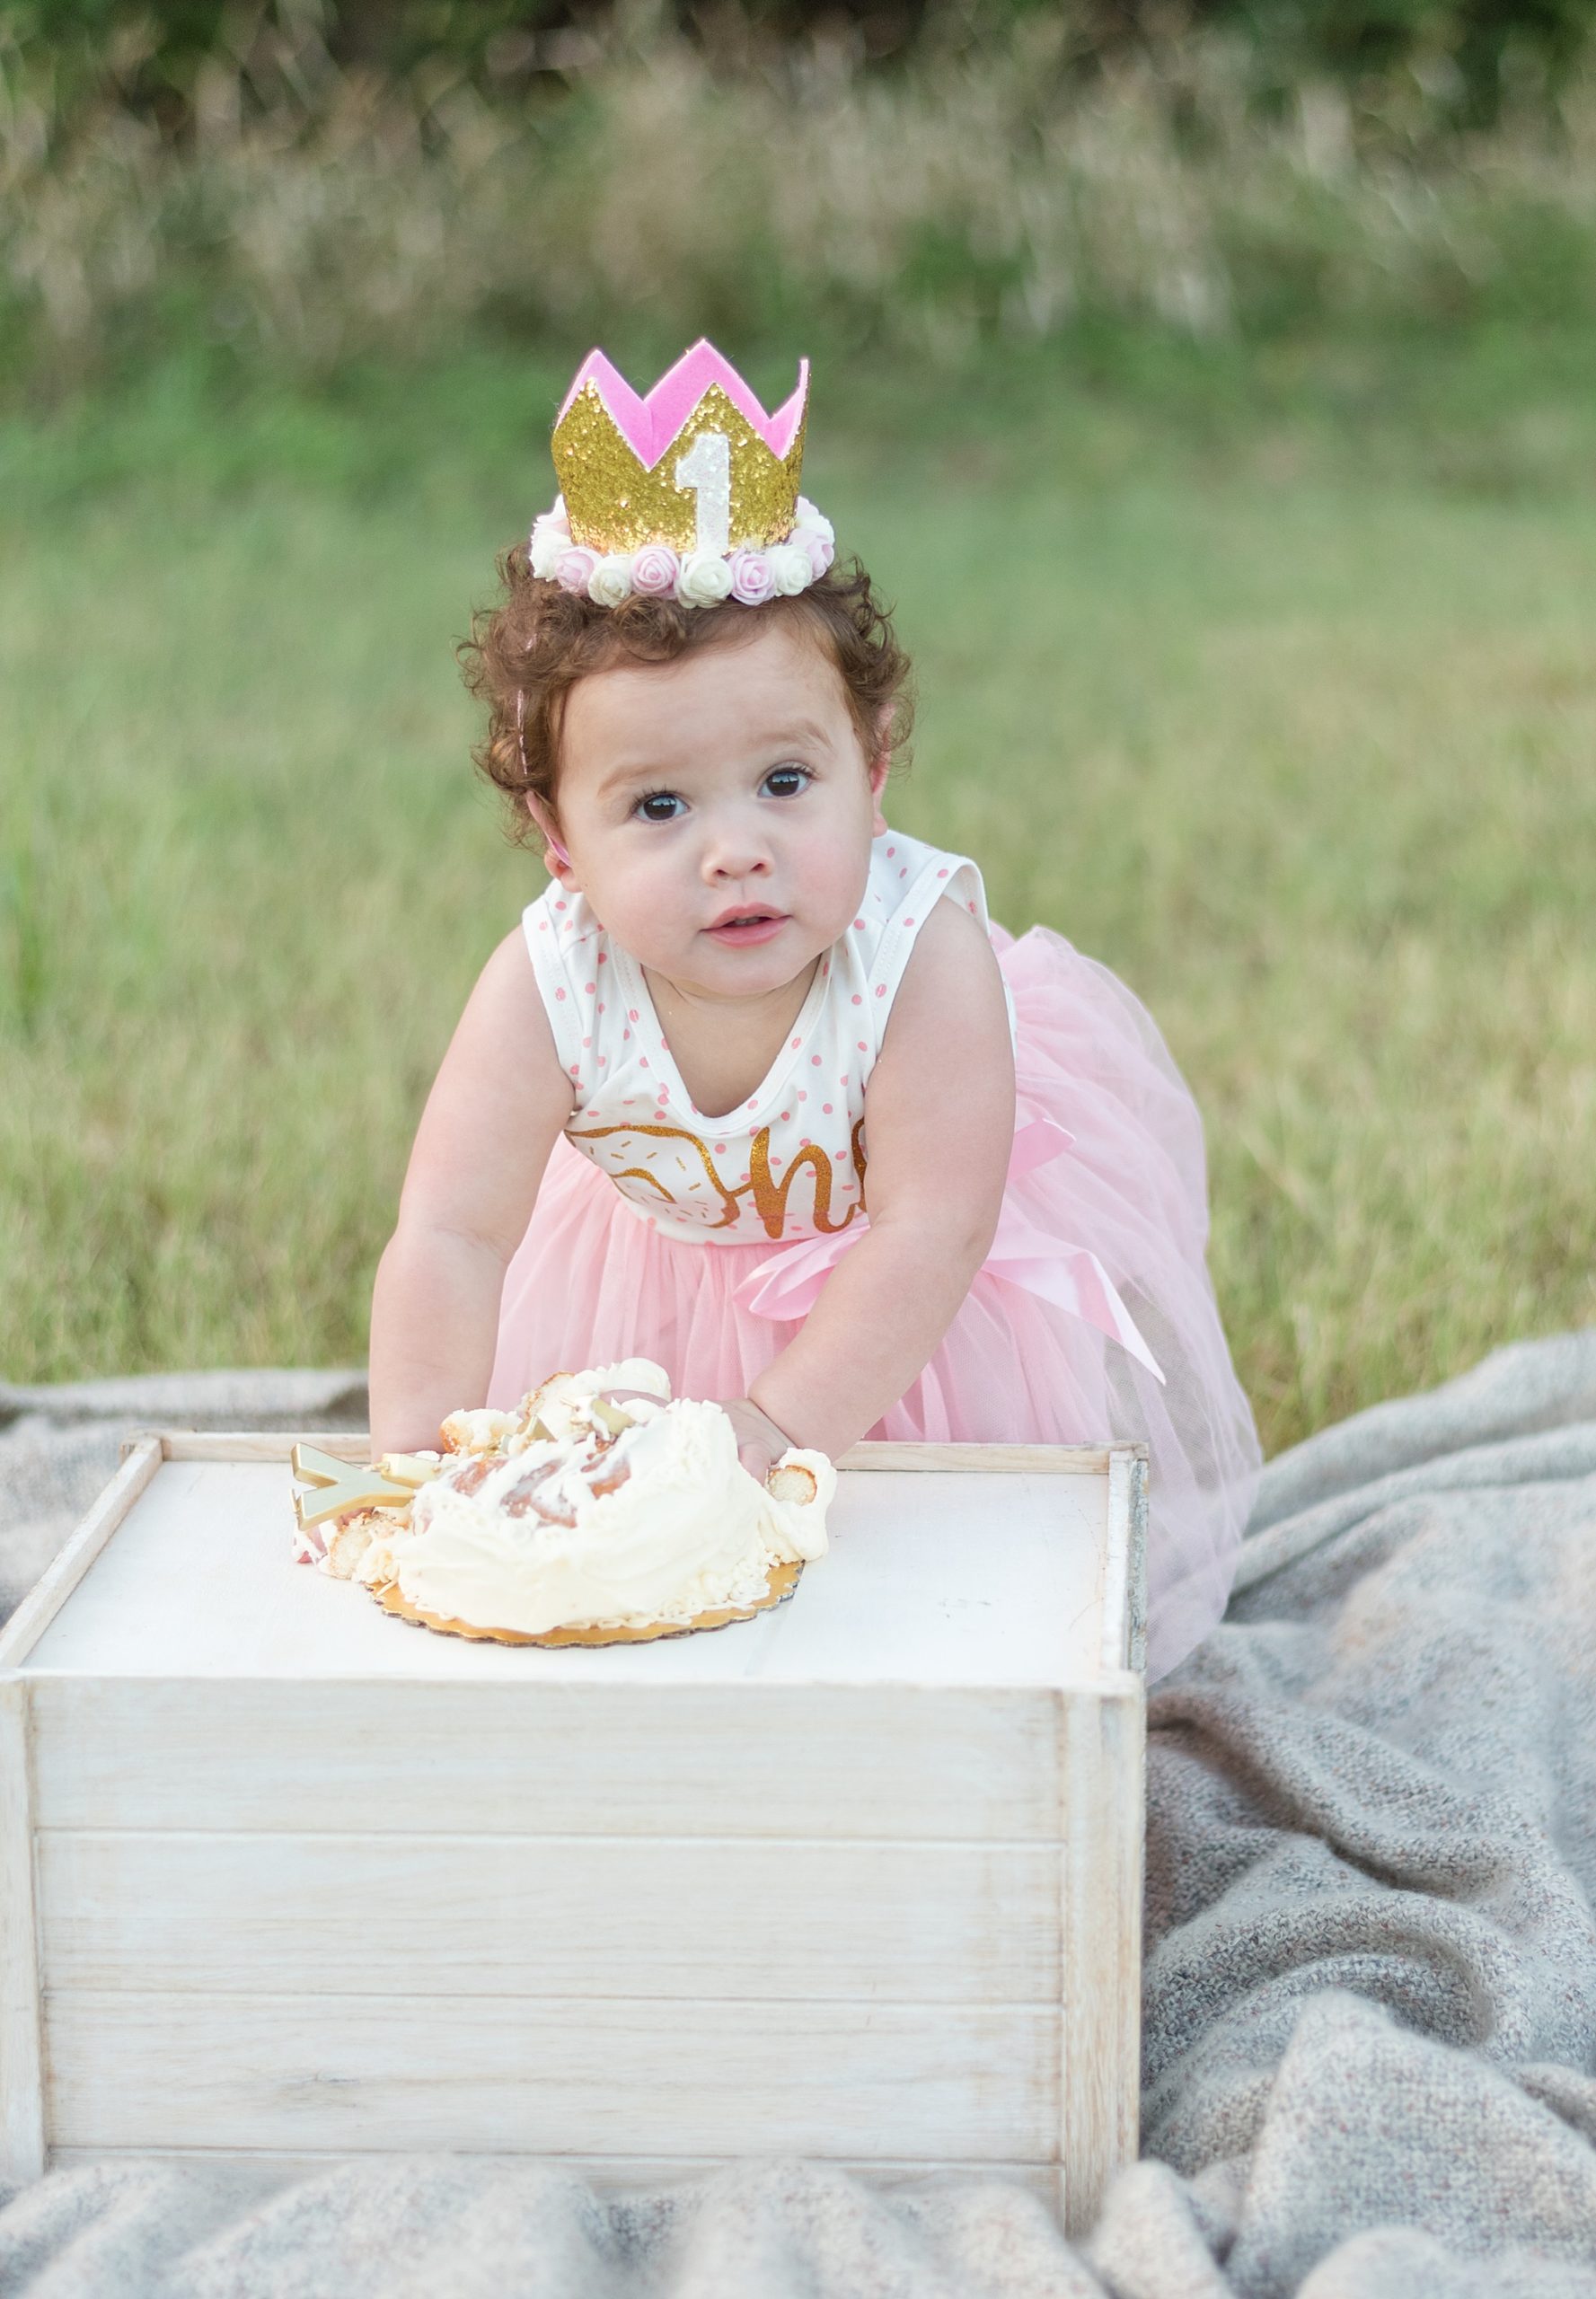 One year old holds fists of cake during cake smash